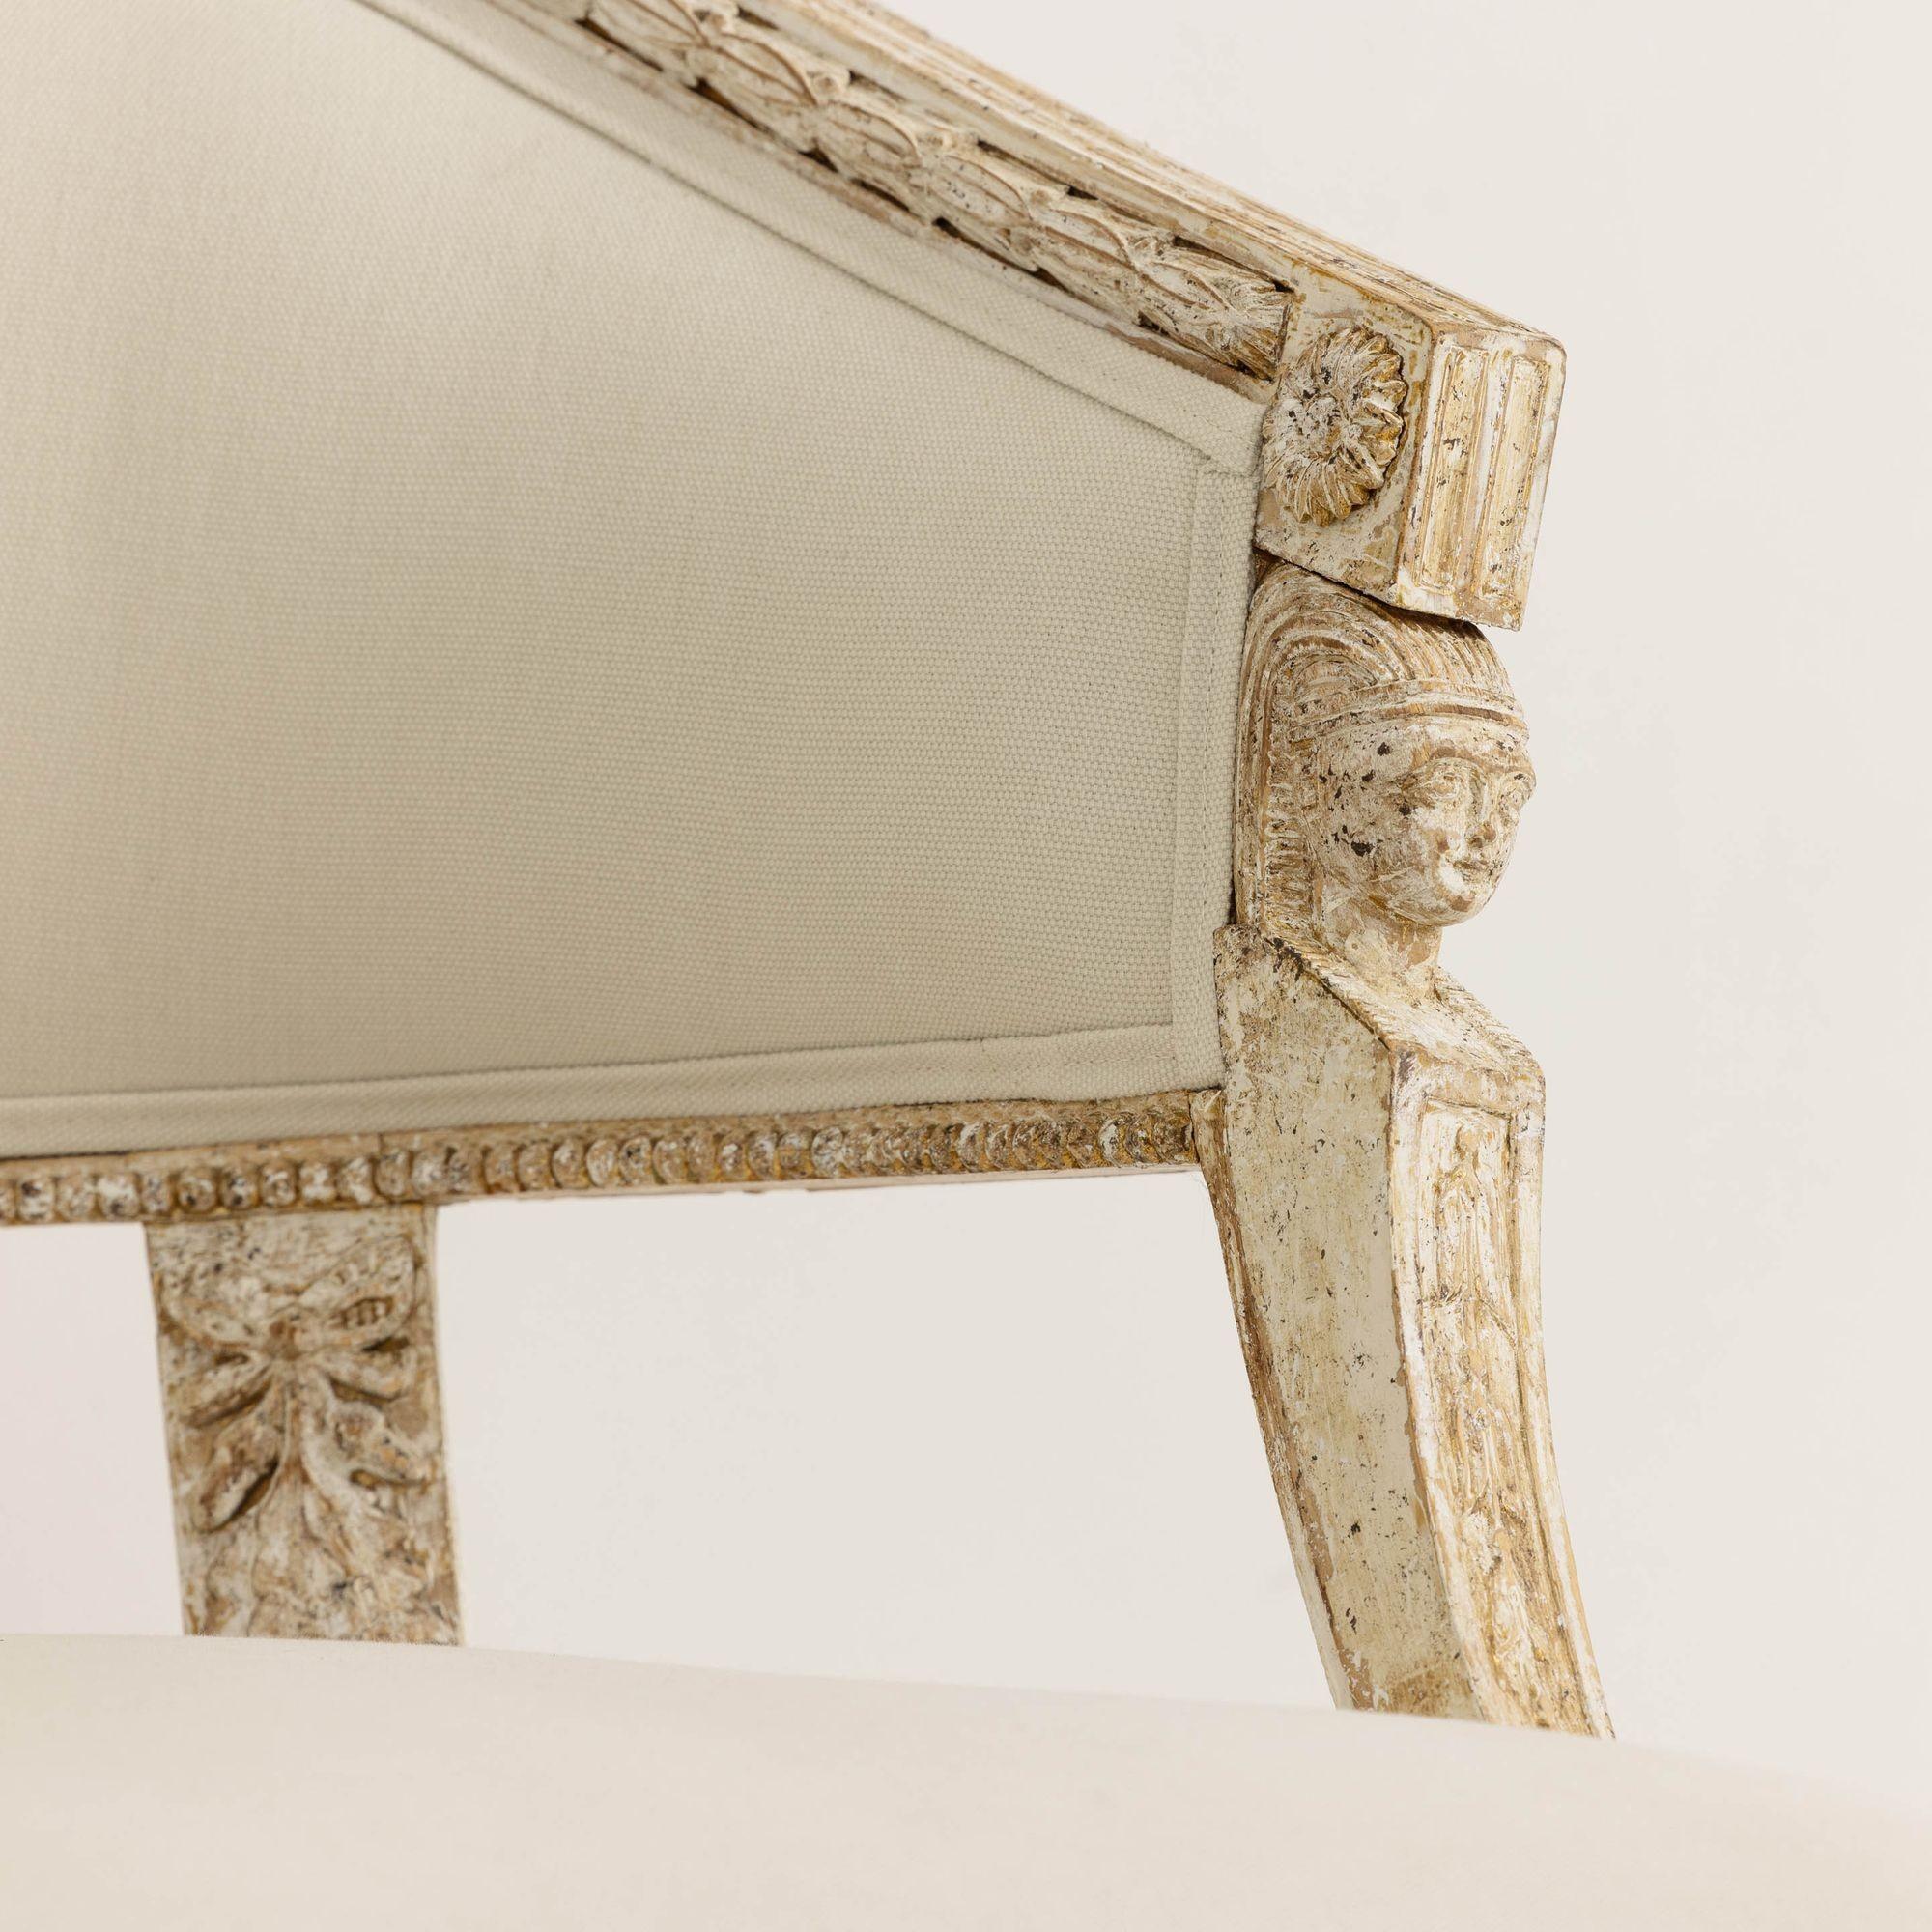 19th Century 19th c. Swedish Gustavian Settee with Egyptian Carvings in Original Paint For Sale